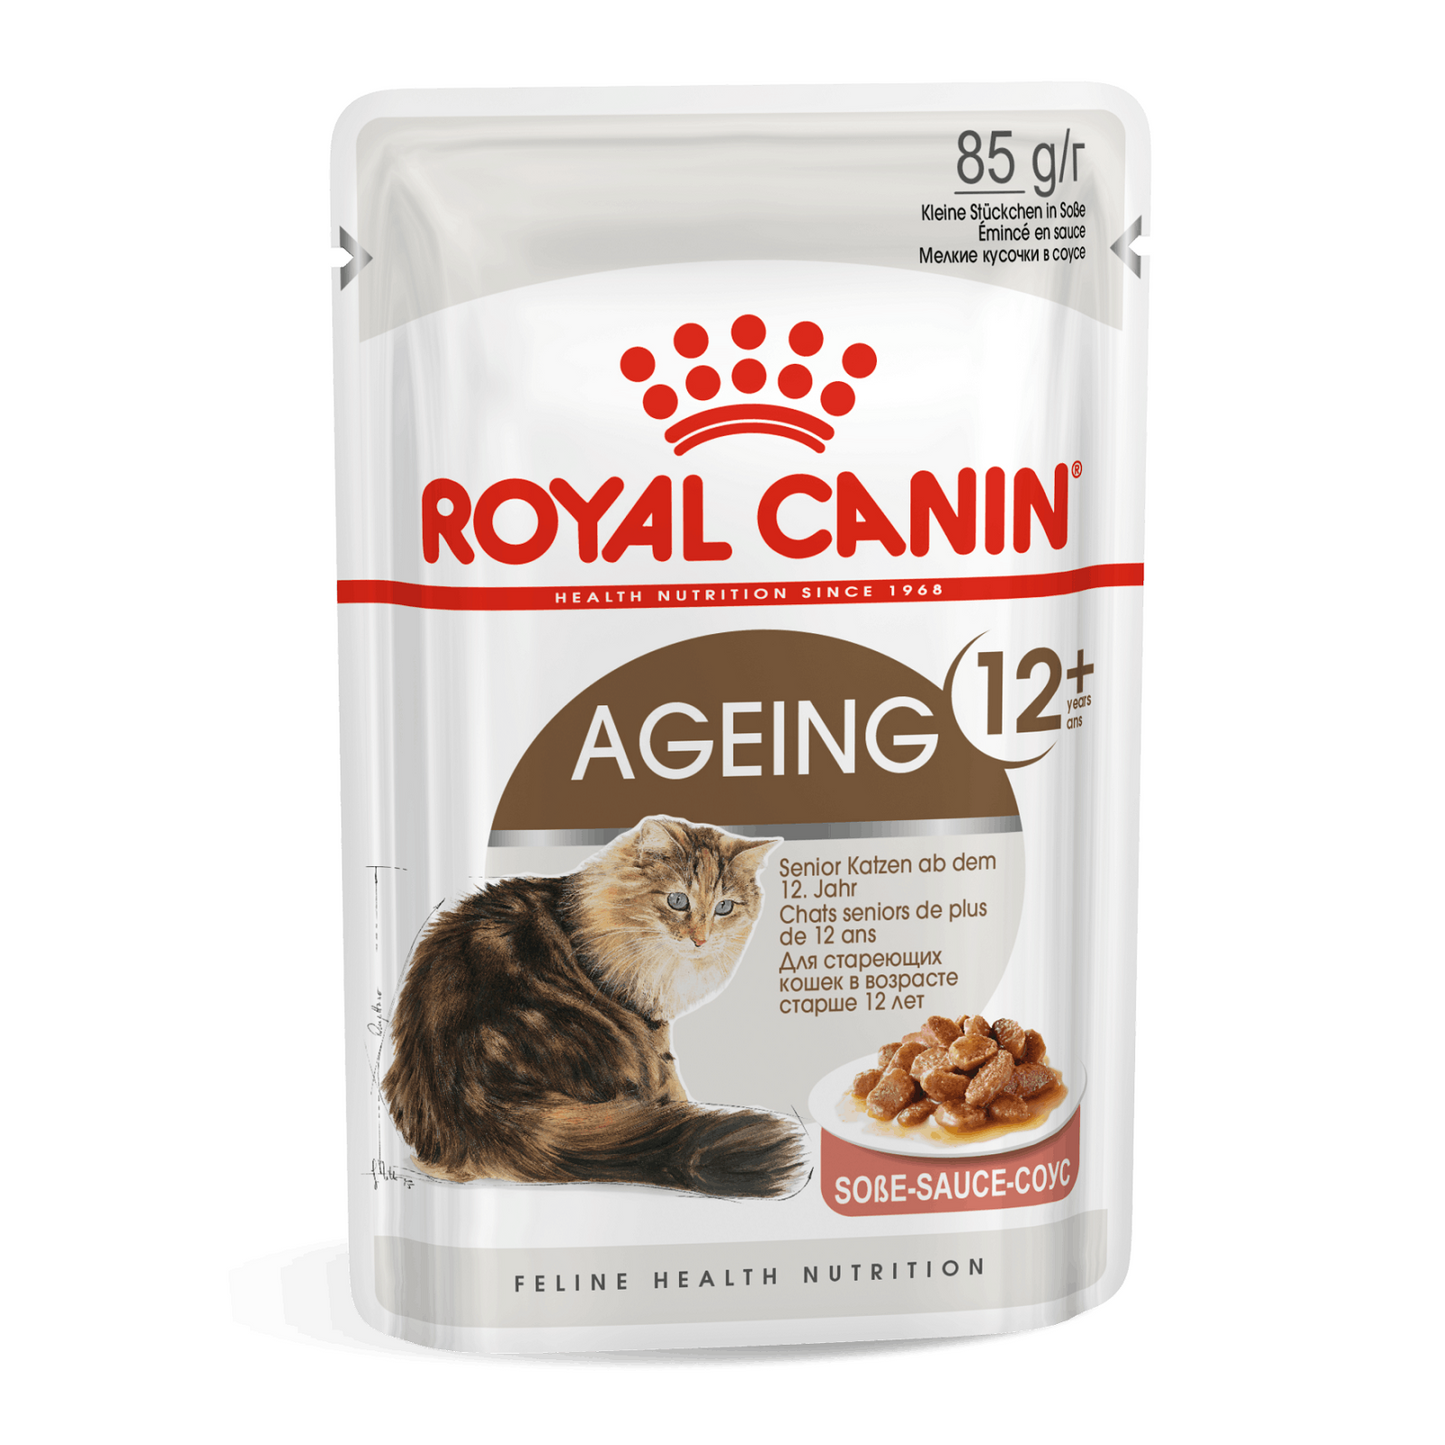 ROYAL CANIN - Ageing 12+ (12 x 85g)